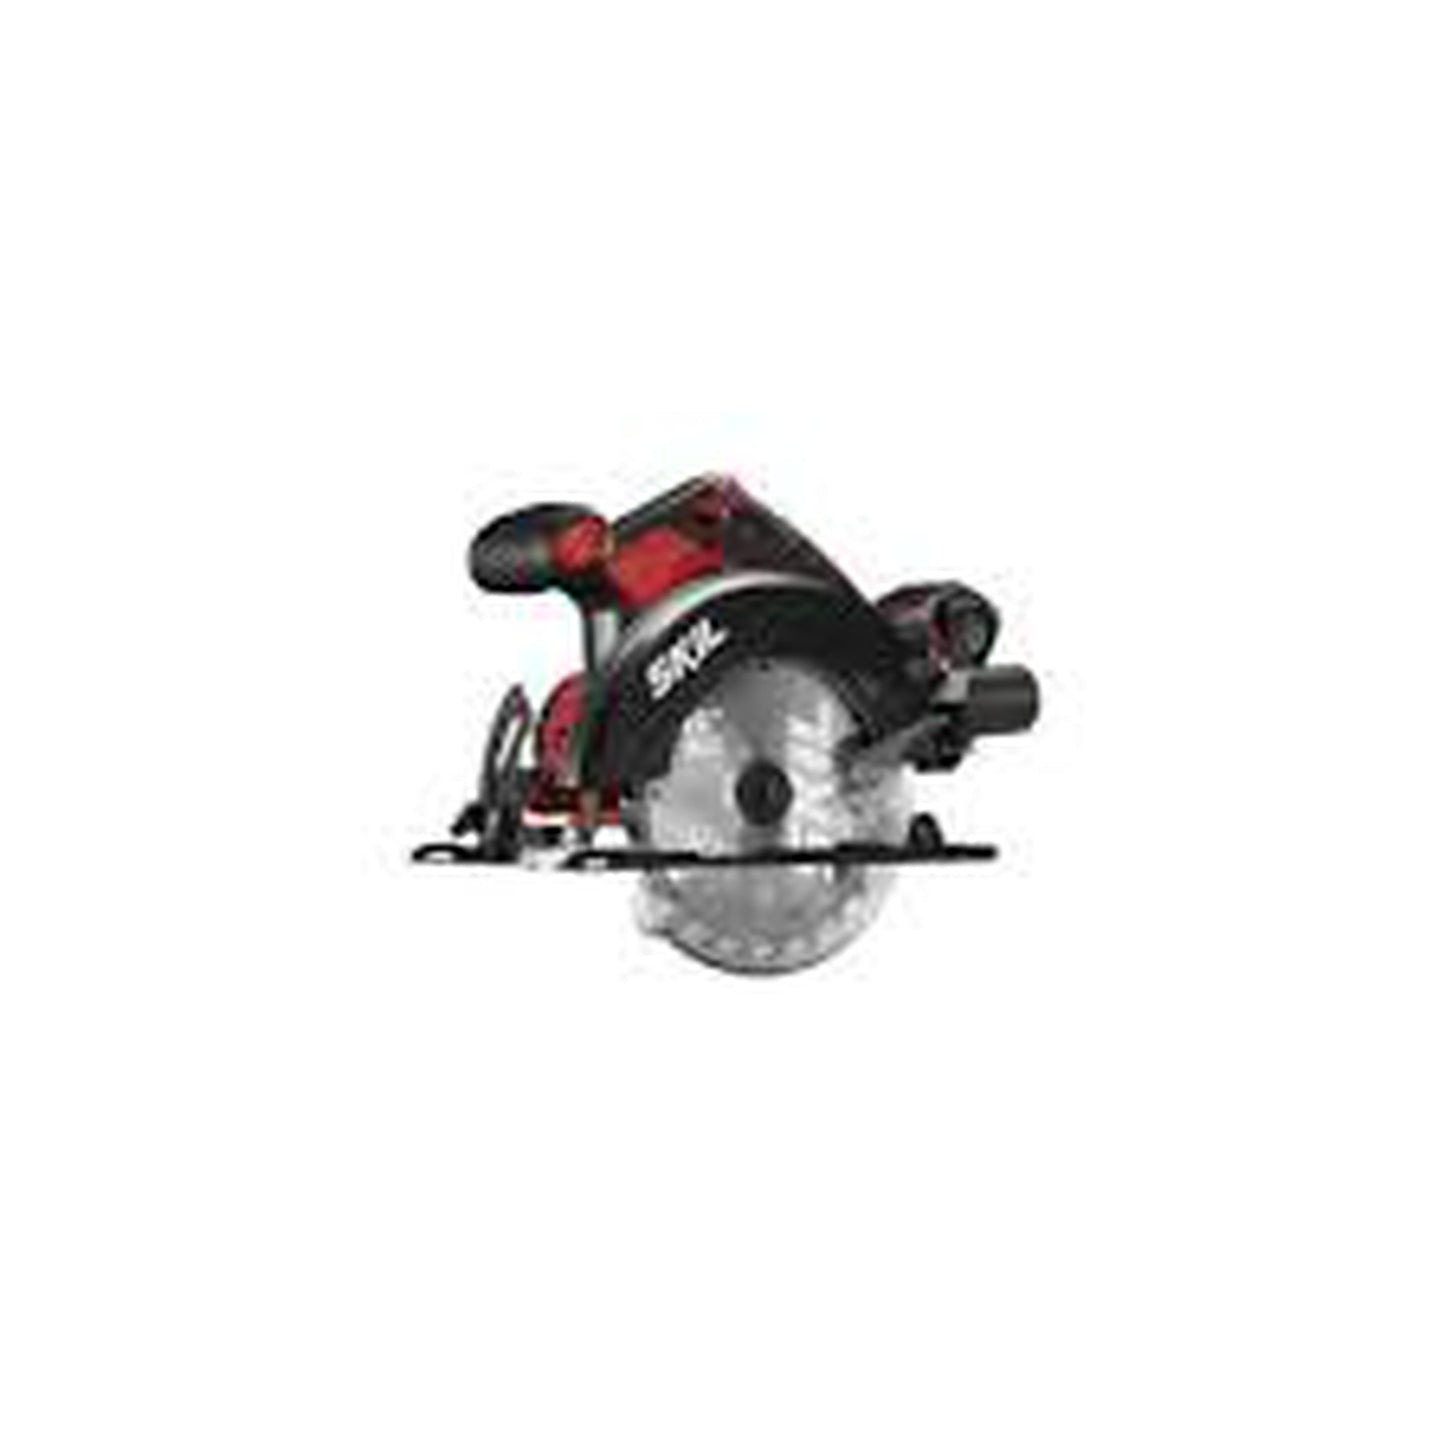 Skil CR540602 Circular Saw Kit, Battery Included, 20 Volt